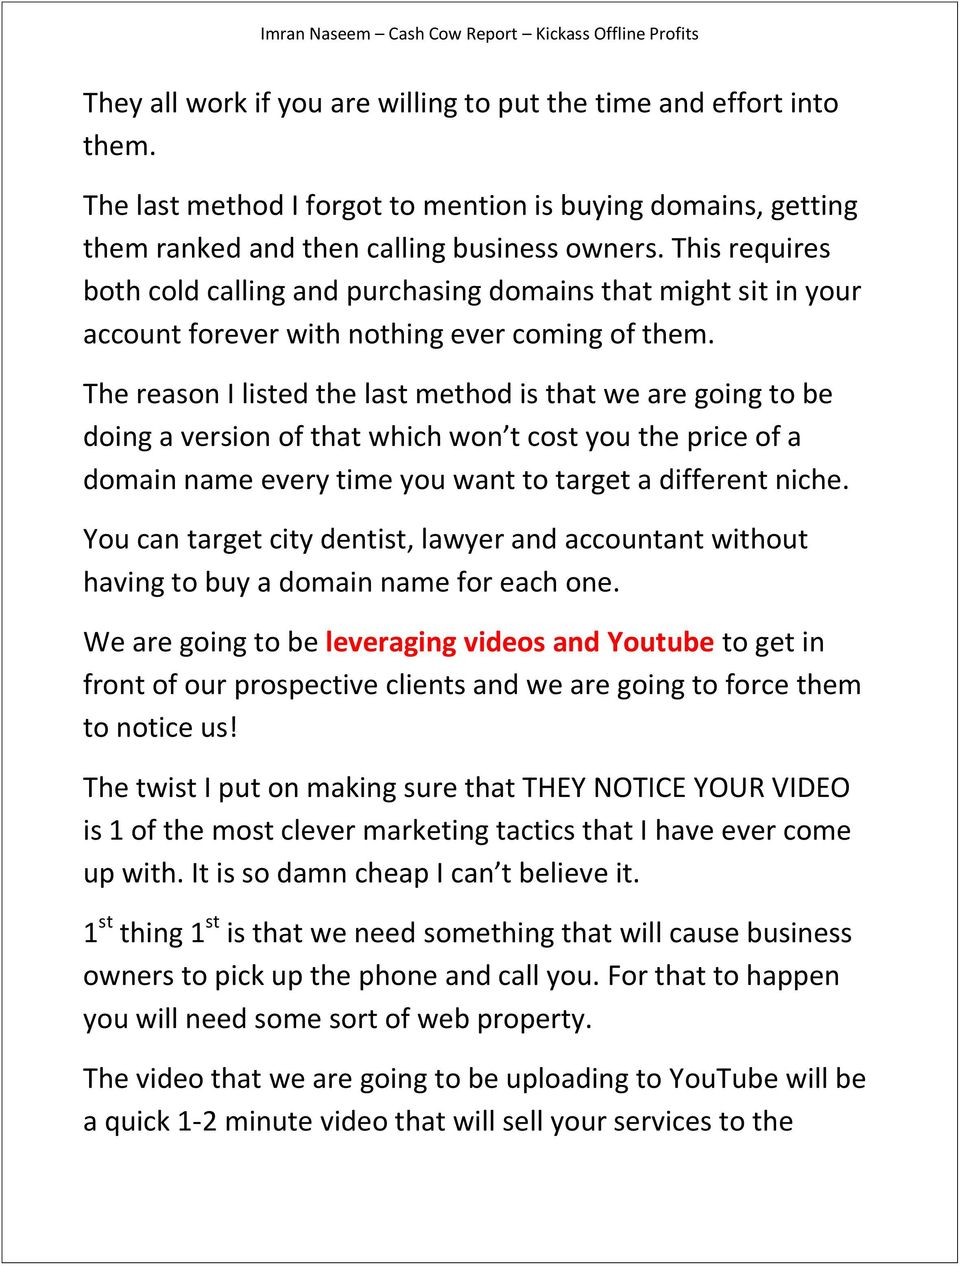 The reason I listed the last method is that we are going to be doing a version of that which won t cost you the price of a domain name every time you want to target a different niche.